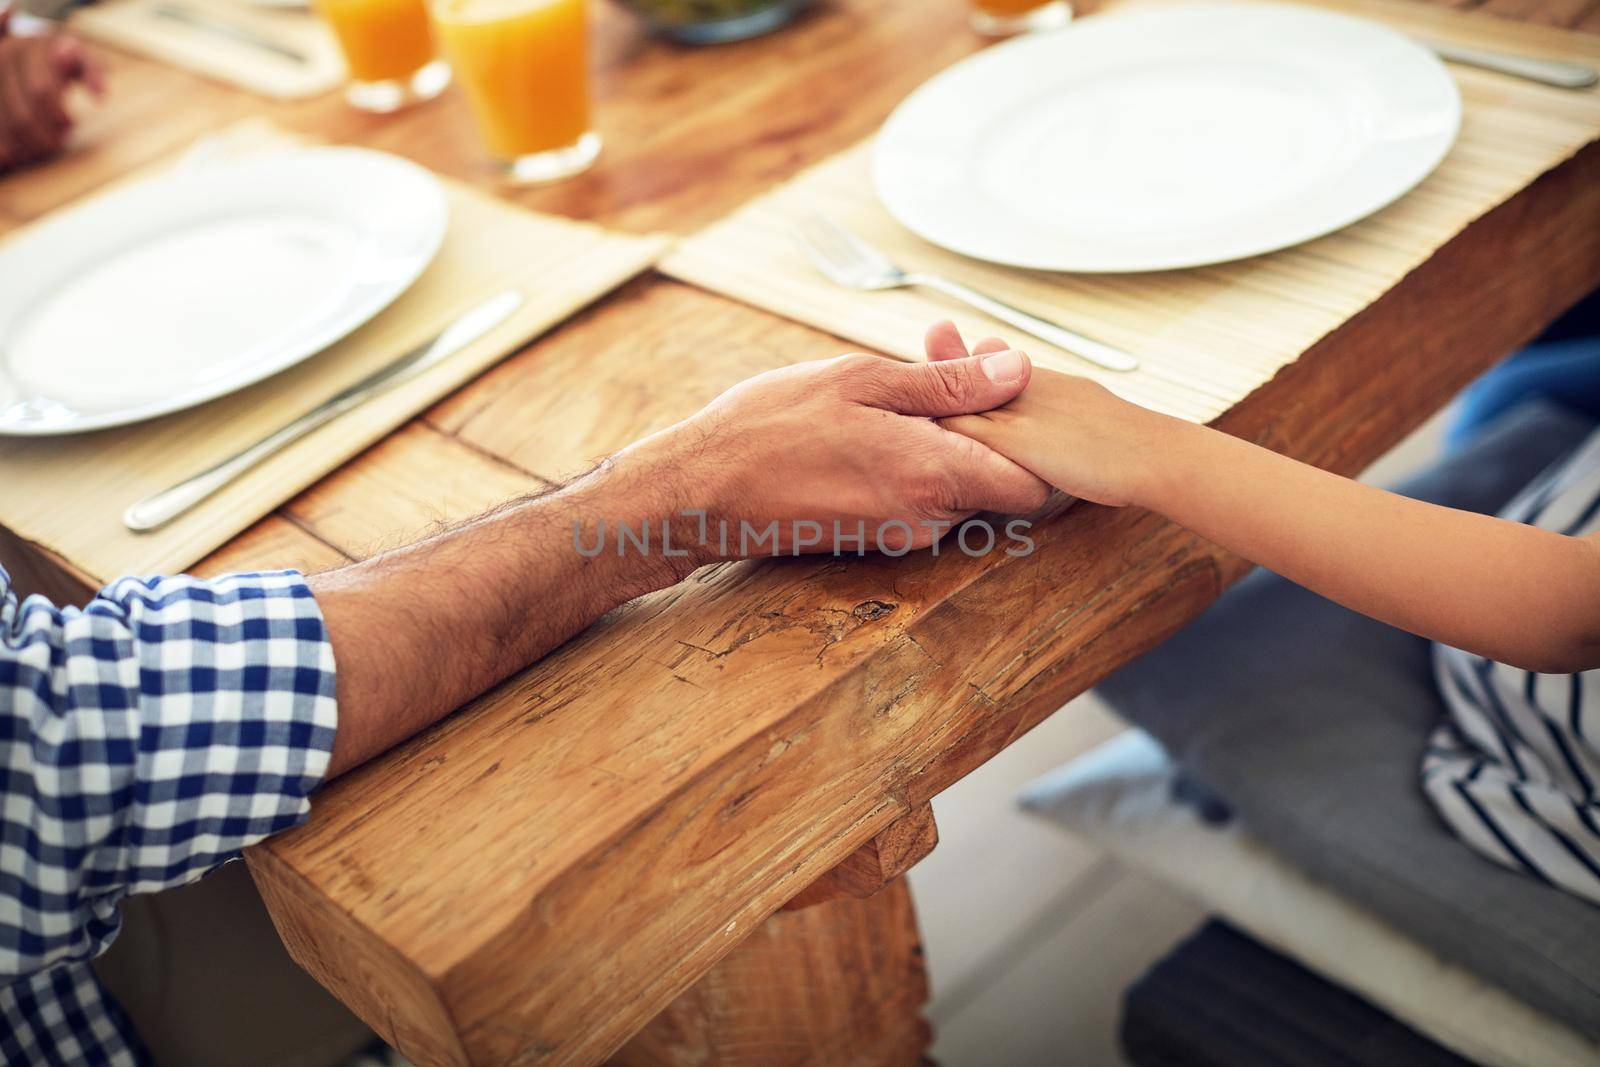 This family has its foundations in faith. an unidentifiable family praying together before enjoying a meal at the table